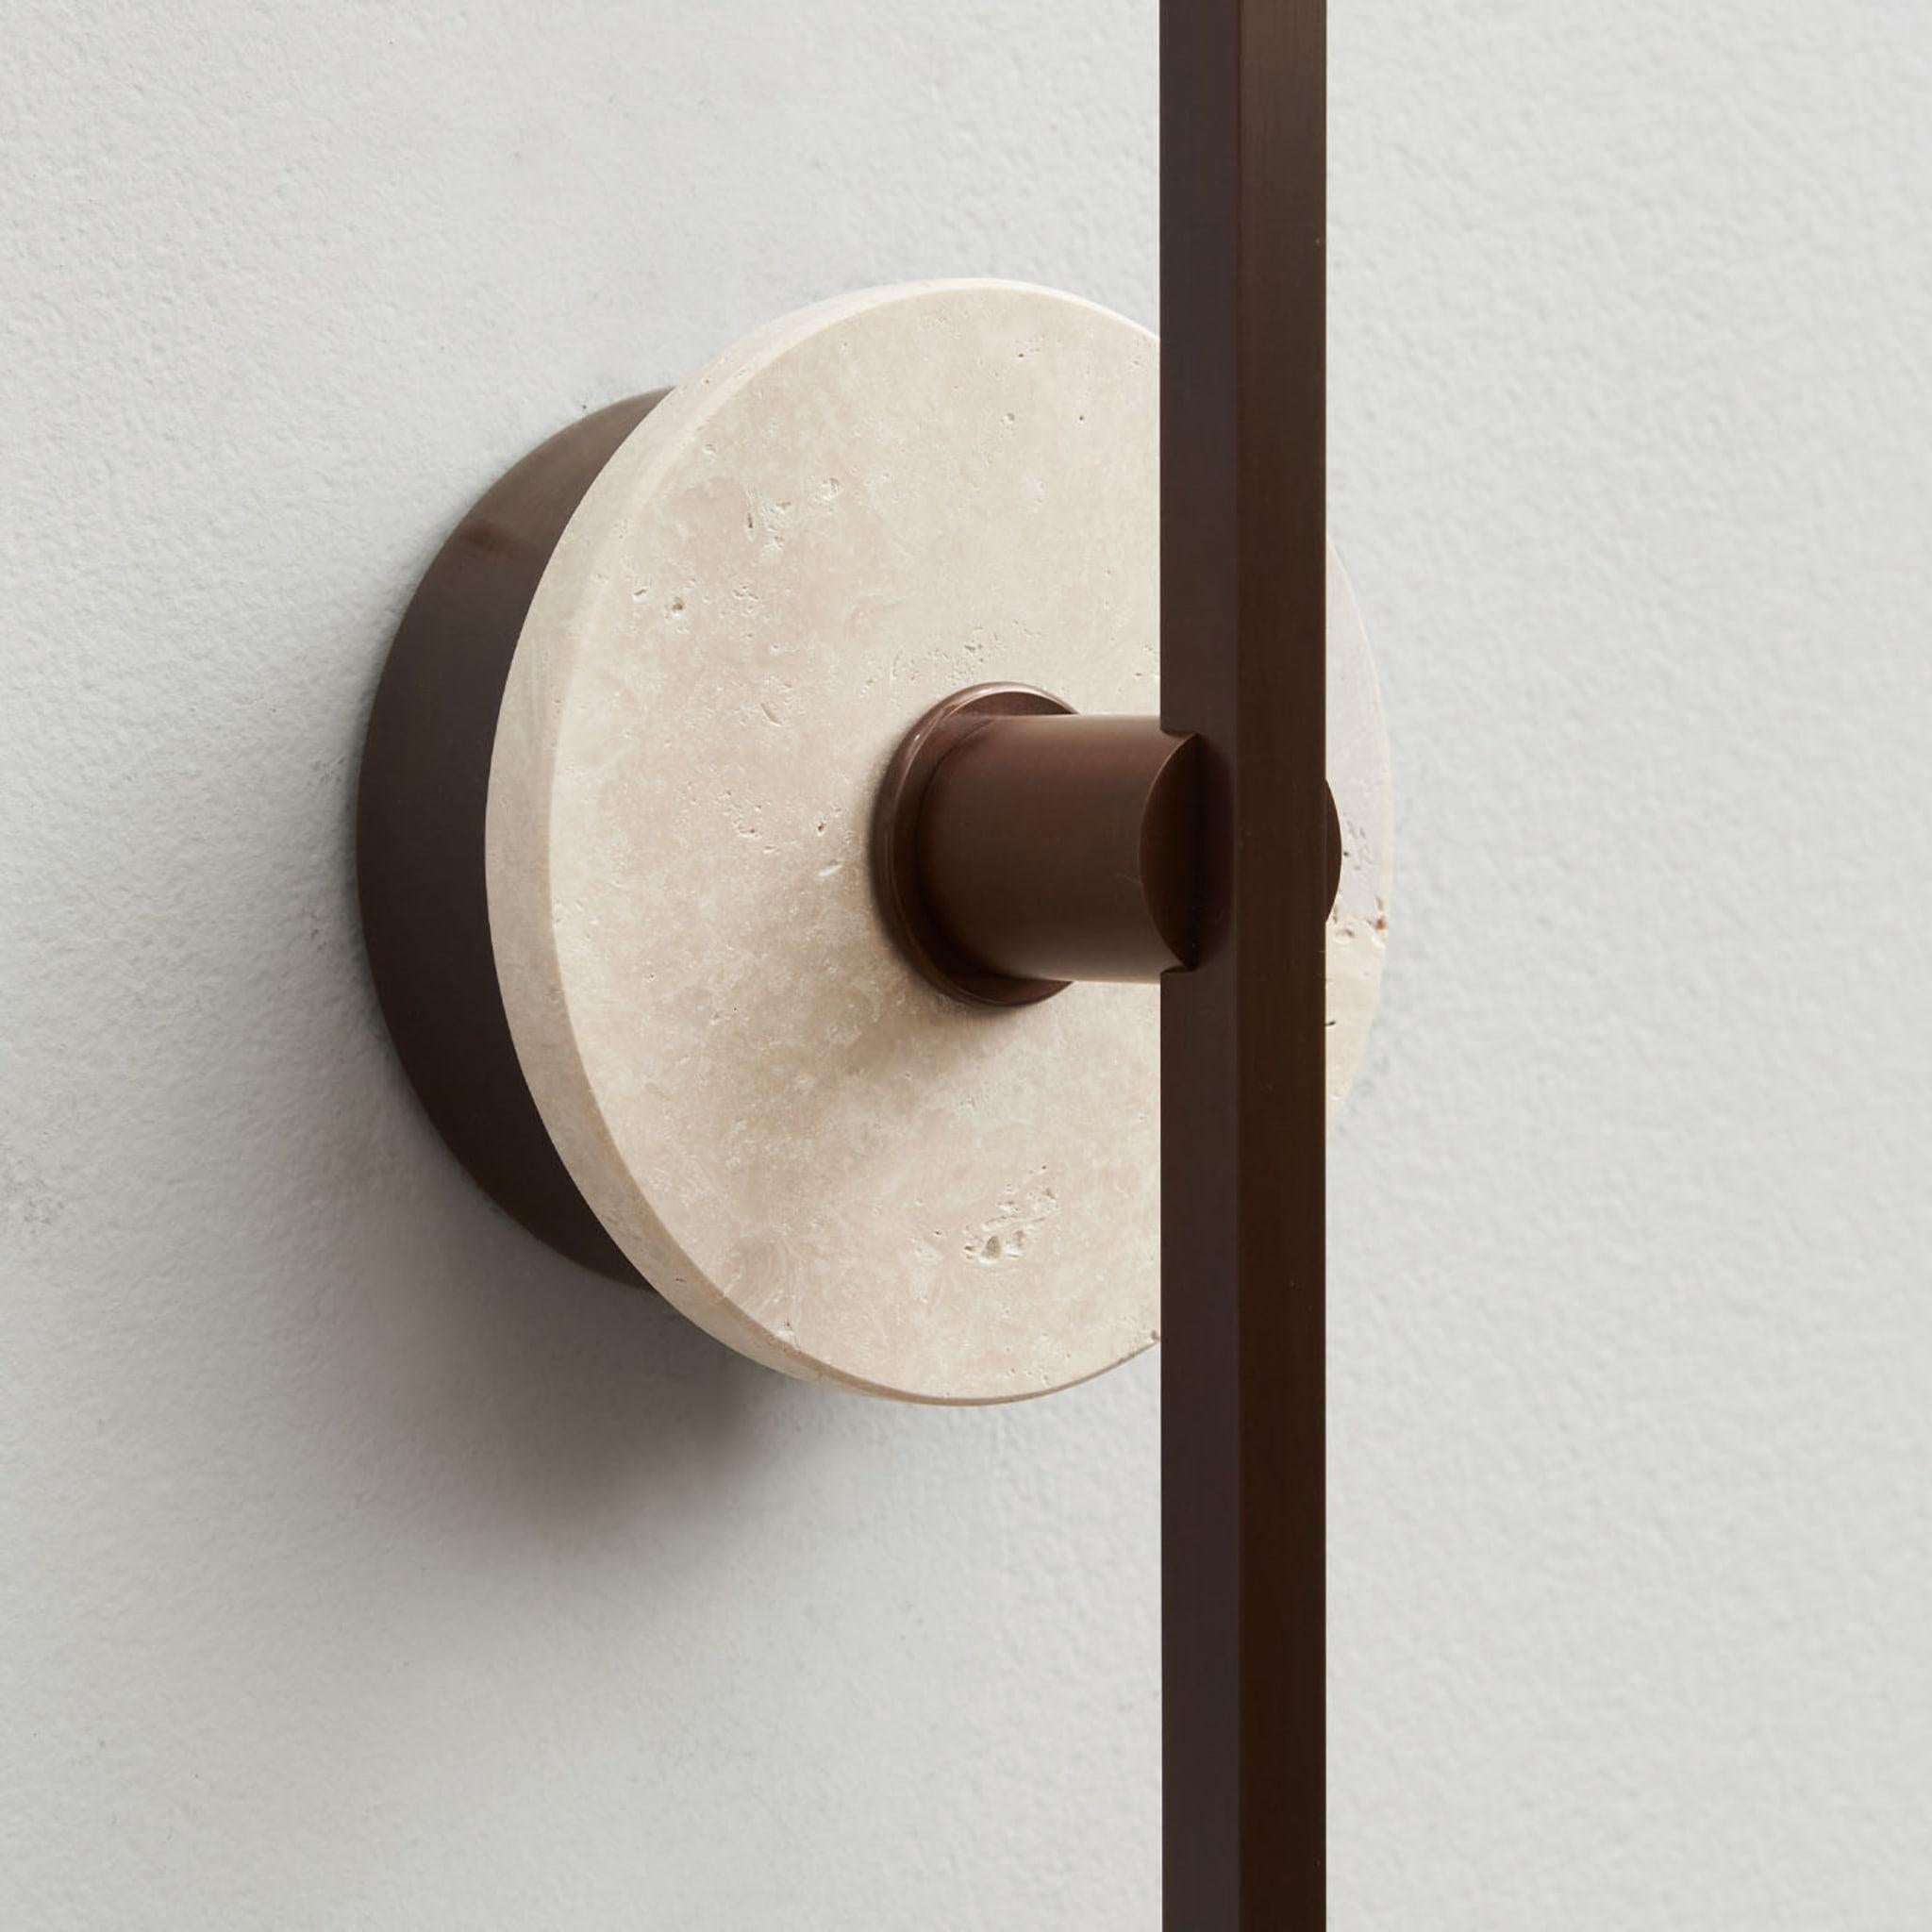 The Stick wall sconce combines the minimalism of thin bronze profiles with the functionality and power of led technology, offering a warm and diffused light. The travertine, a purely decorative element, embellishes the product's structure with a